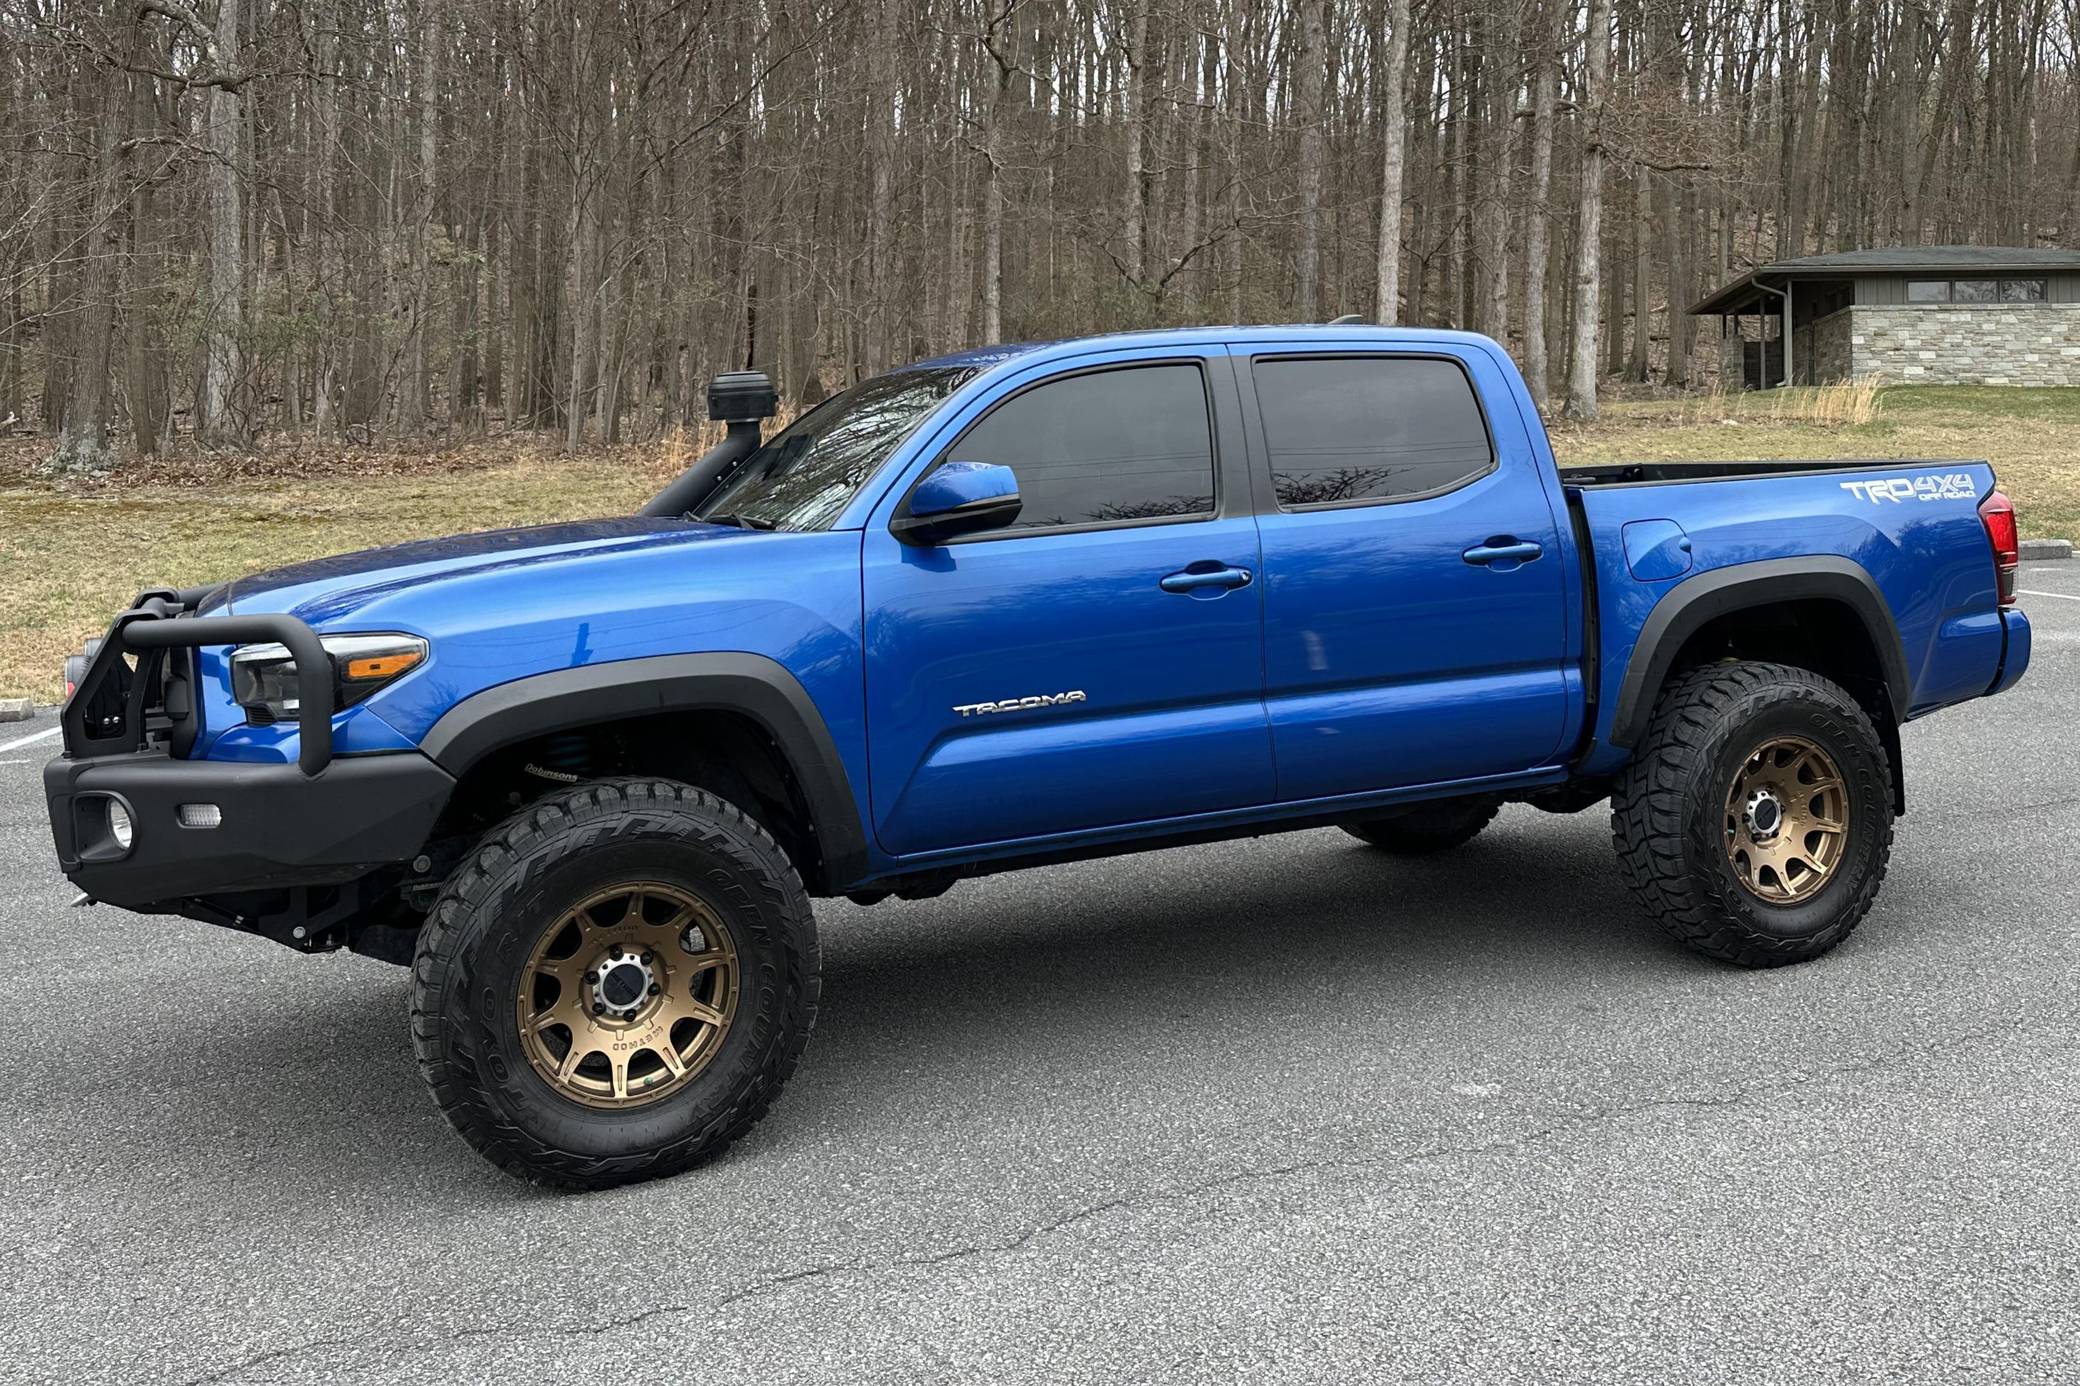 2018 Tacoma ready for adventure, adds safety features